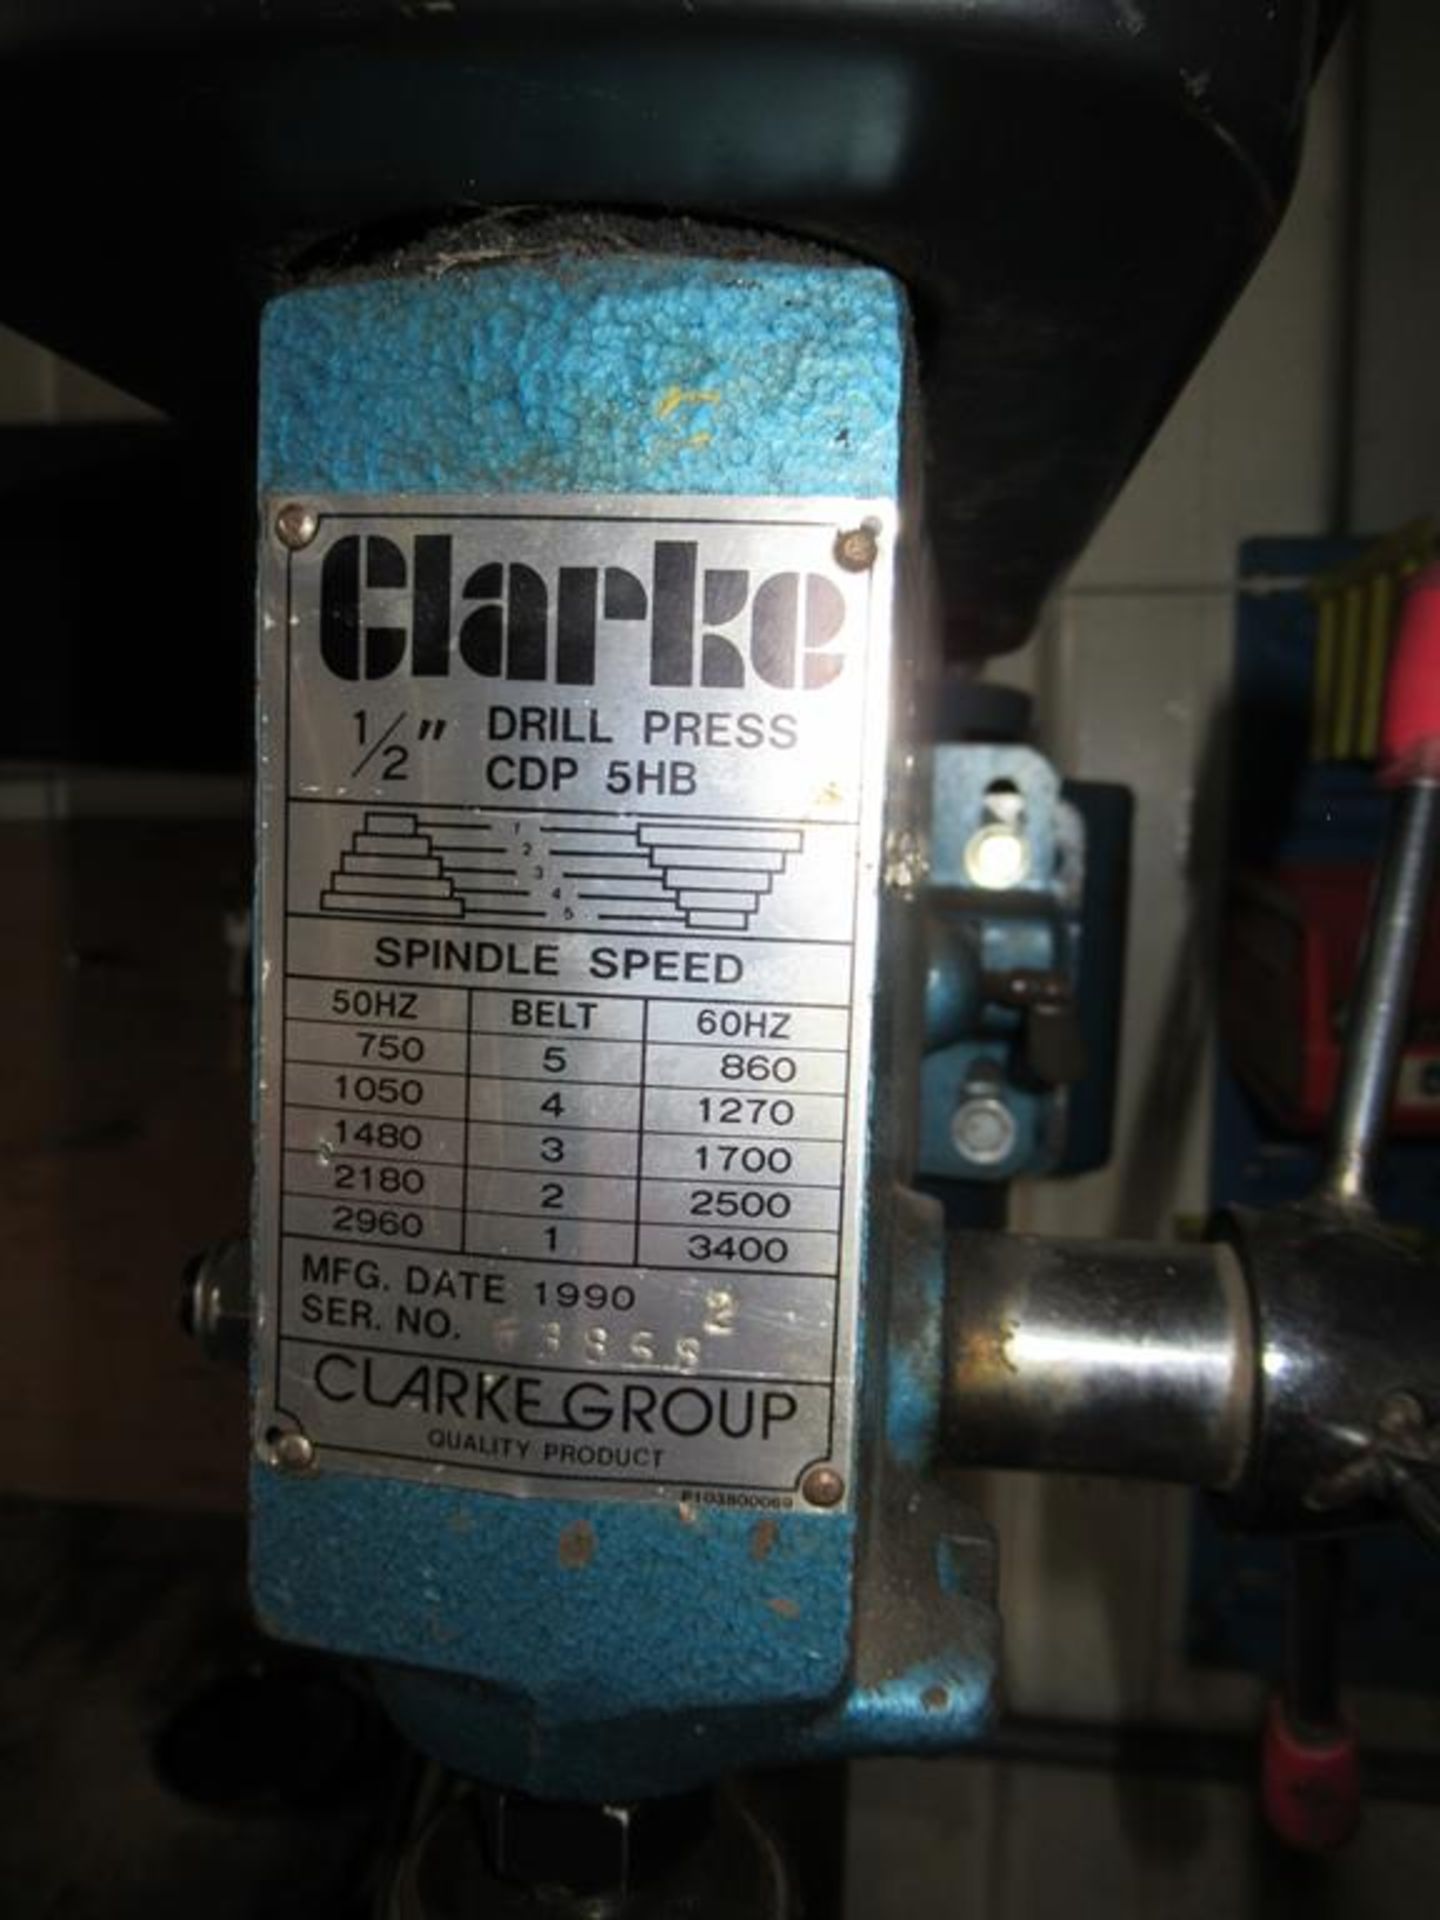 Clarke CDP 5HB 1/2" Pillar Drill with metal stand 240V - Image 6 of 7